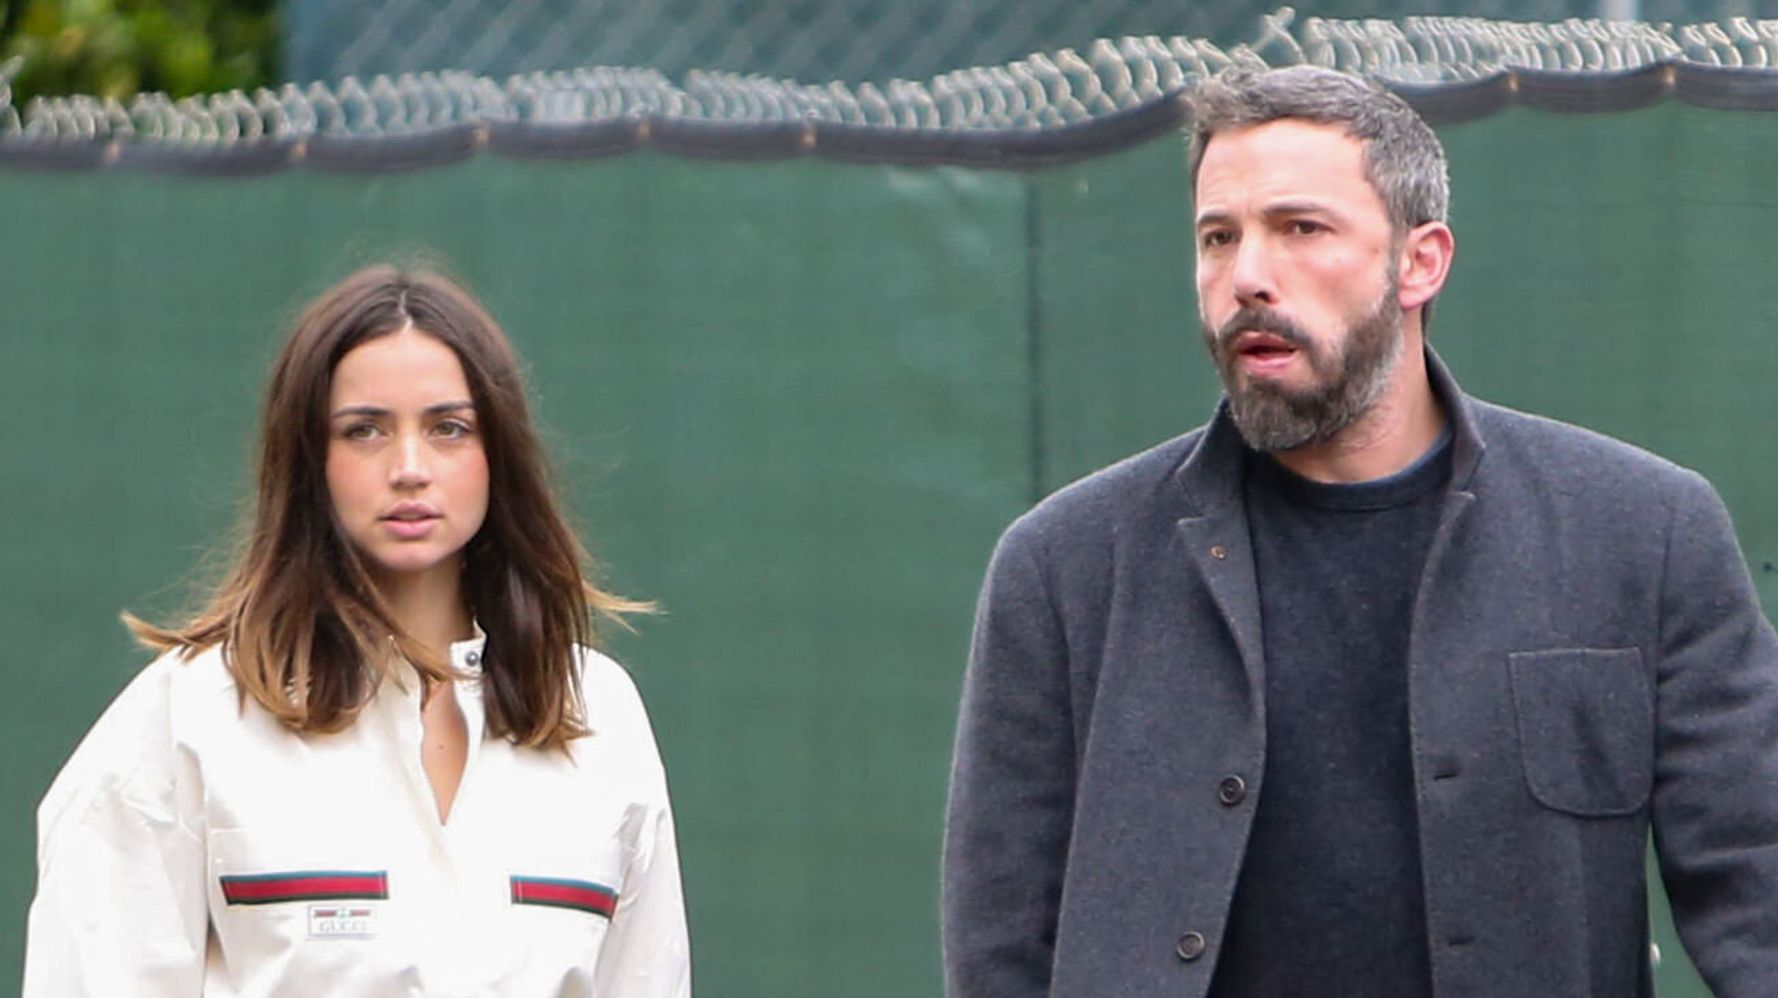 Ana De Armas makes it absolutely clear that she did not return with Ben Affleck